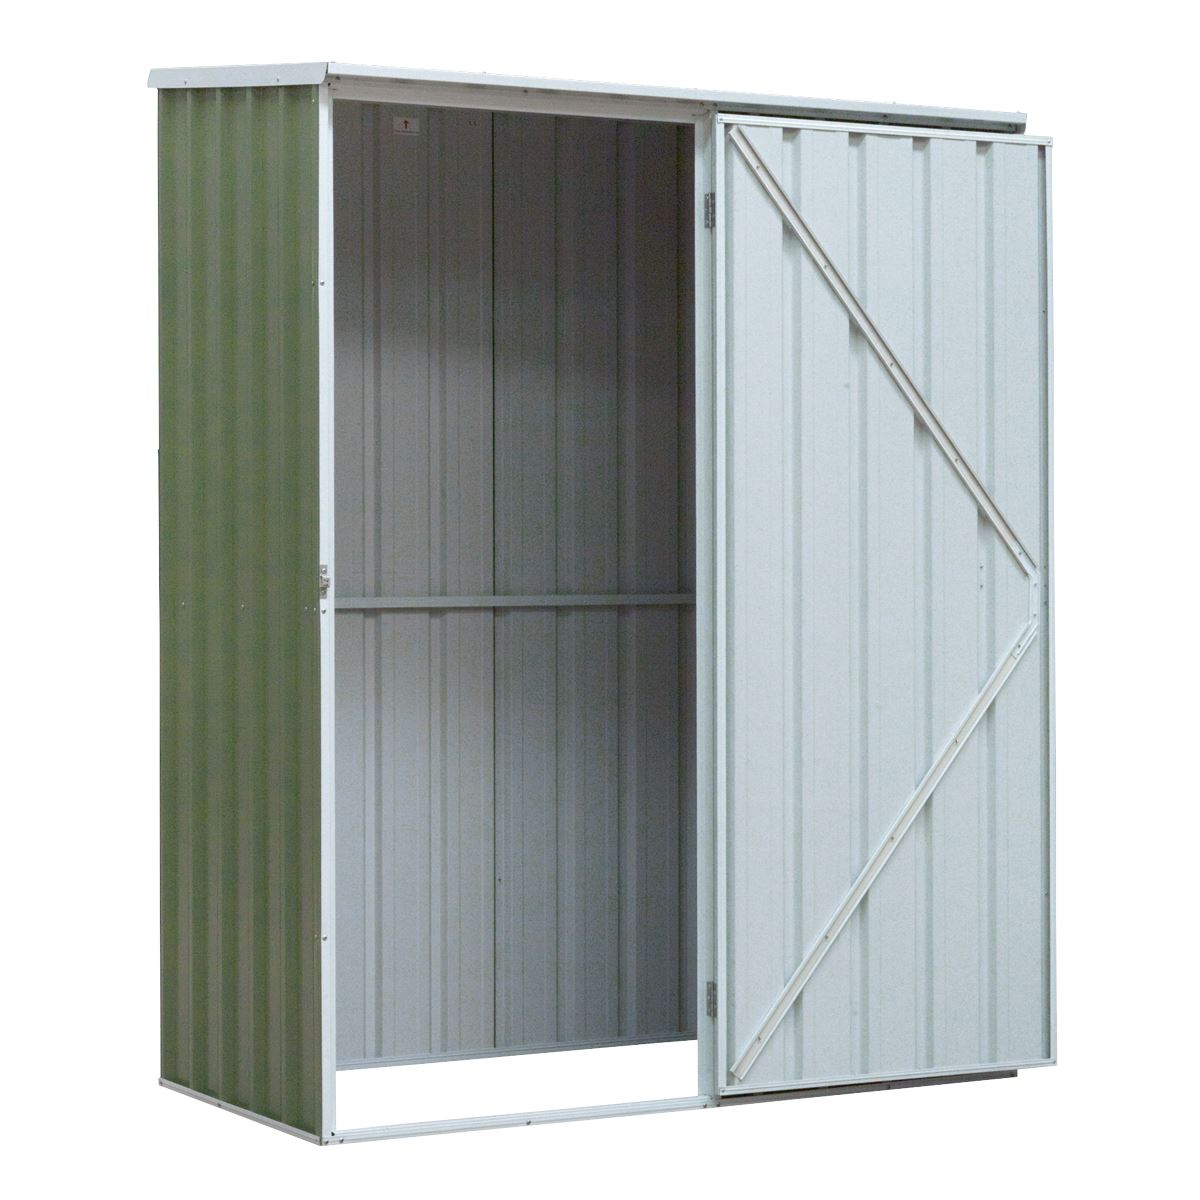 Dellonda Galvanized Steel Garden/Outdoor/Storage Shed, 1.5 x 0.8 x 1.9m, Pent Style Roof - Green